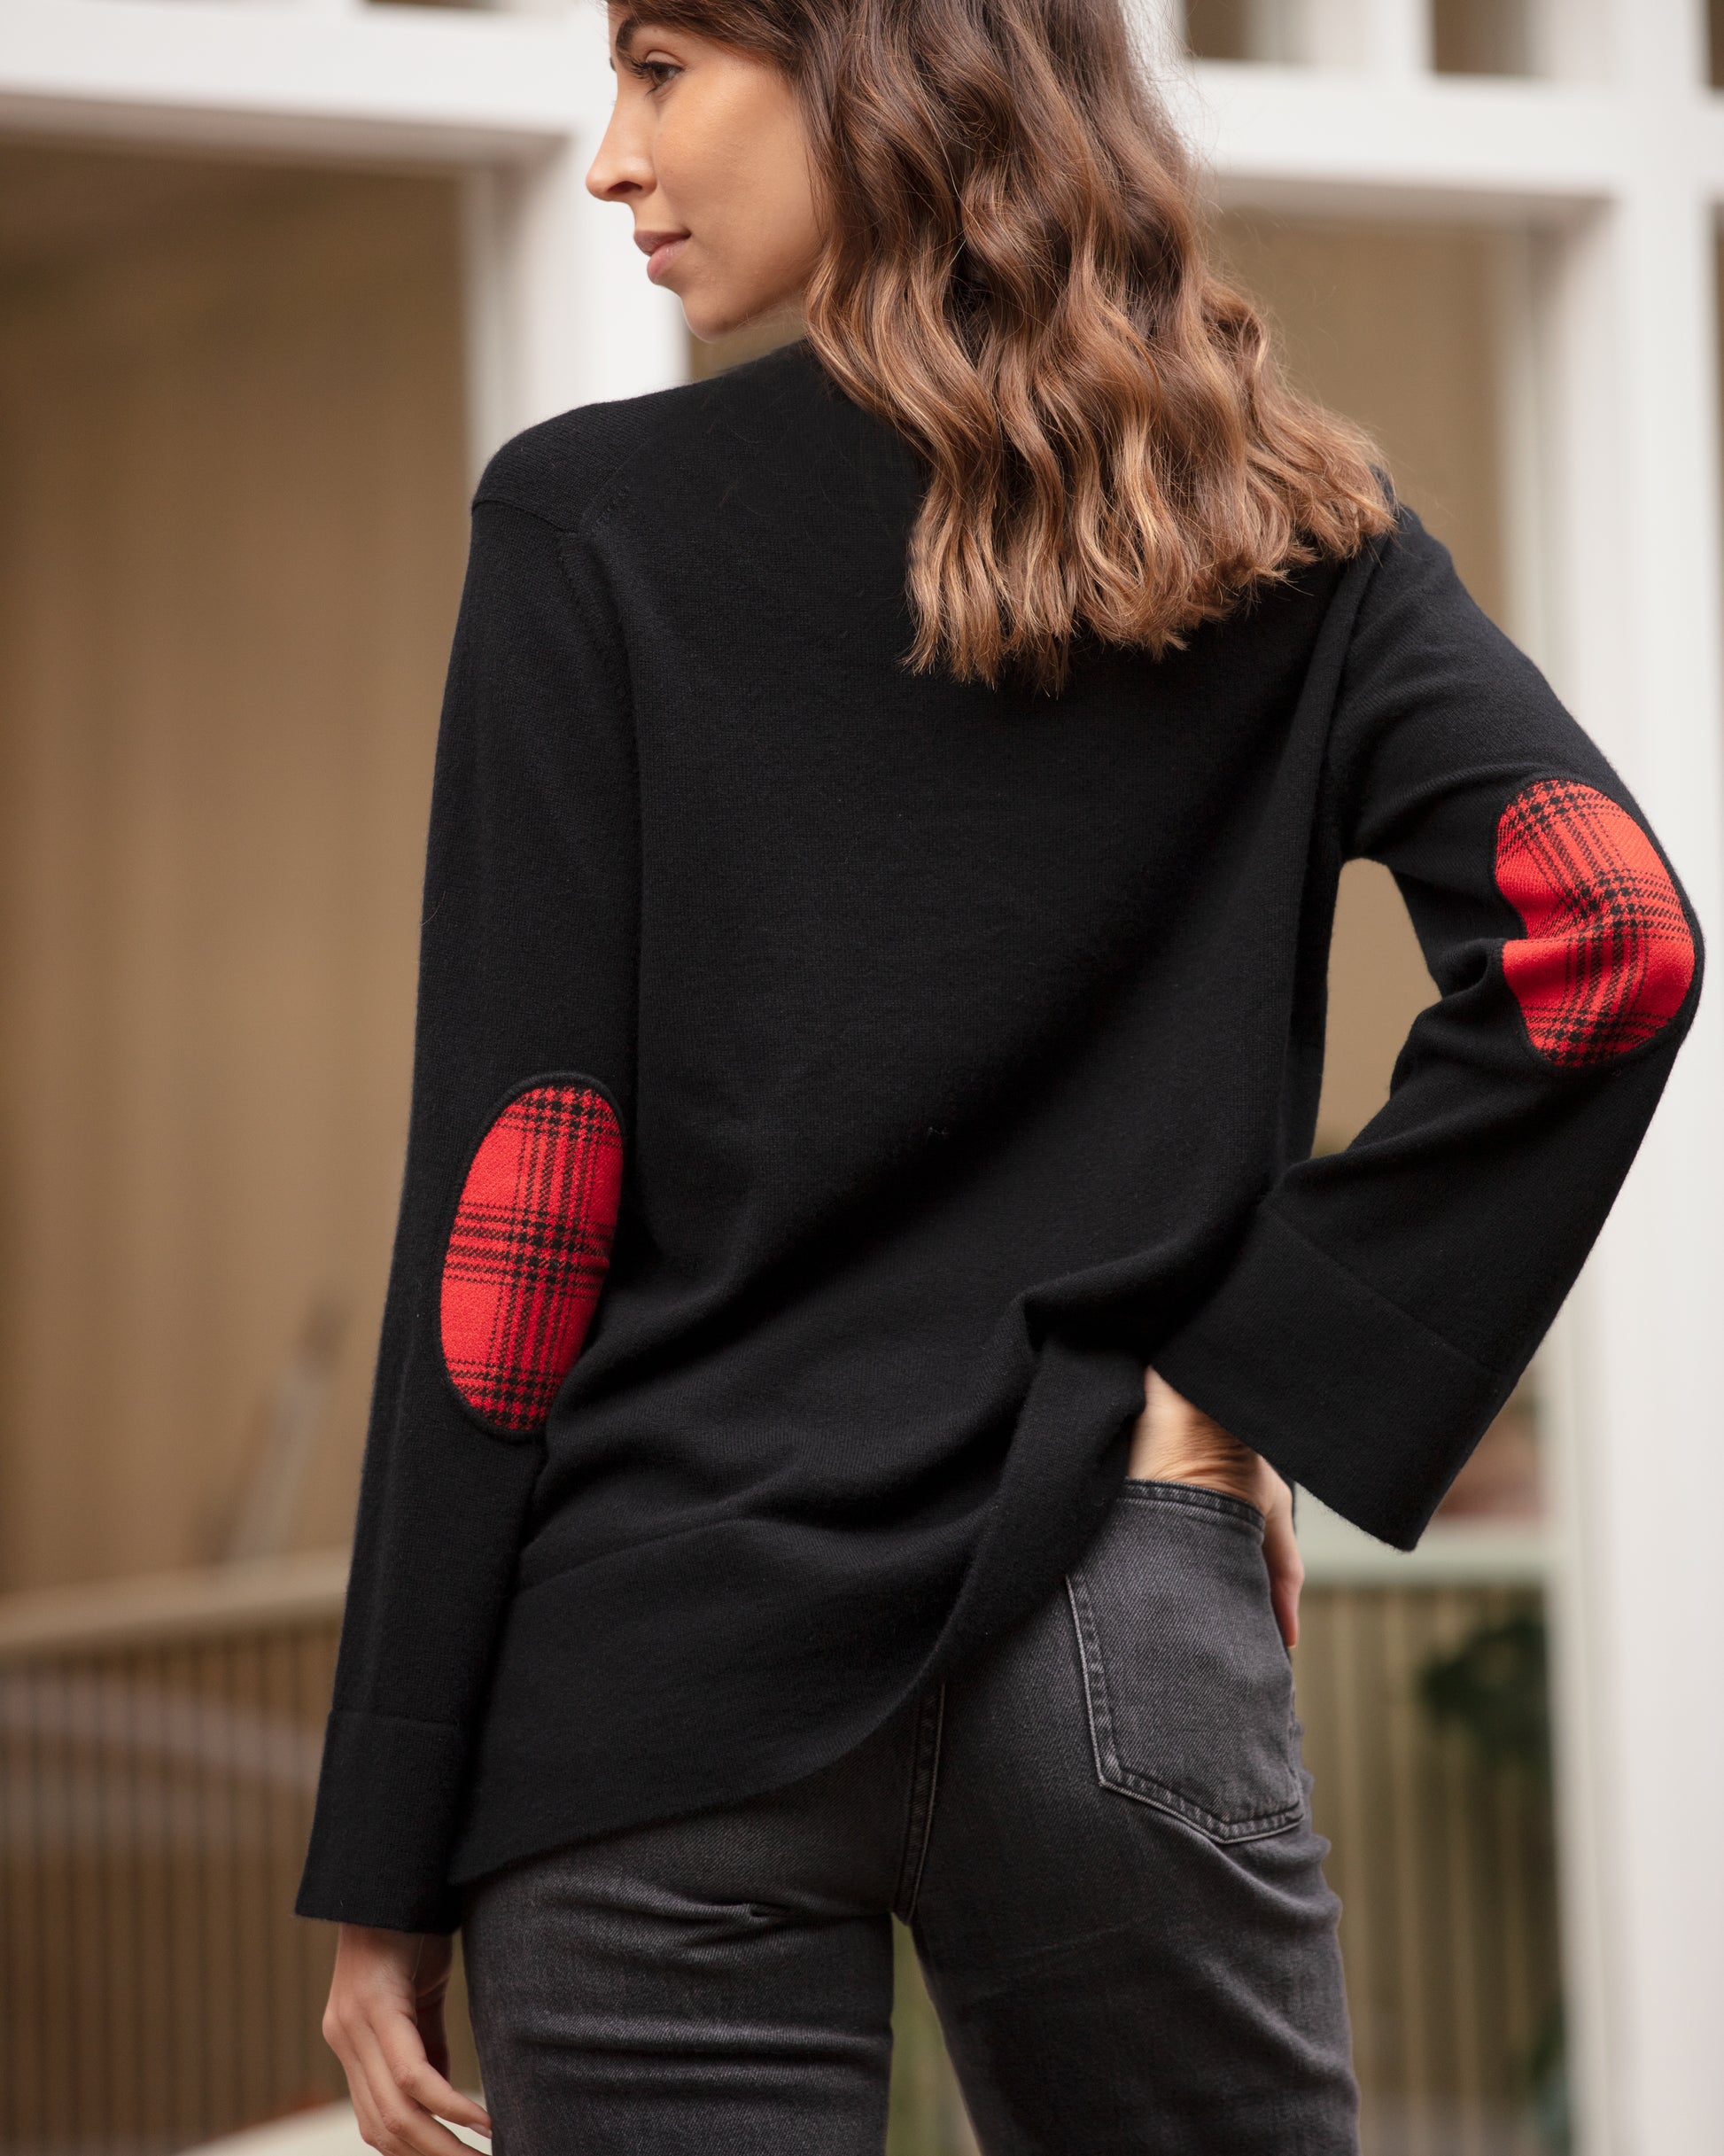 Women's relaxed Fit Cashmere Sweater